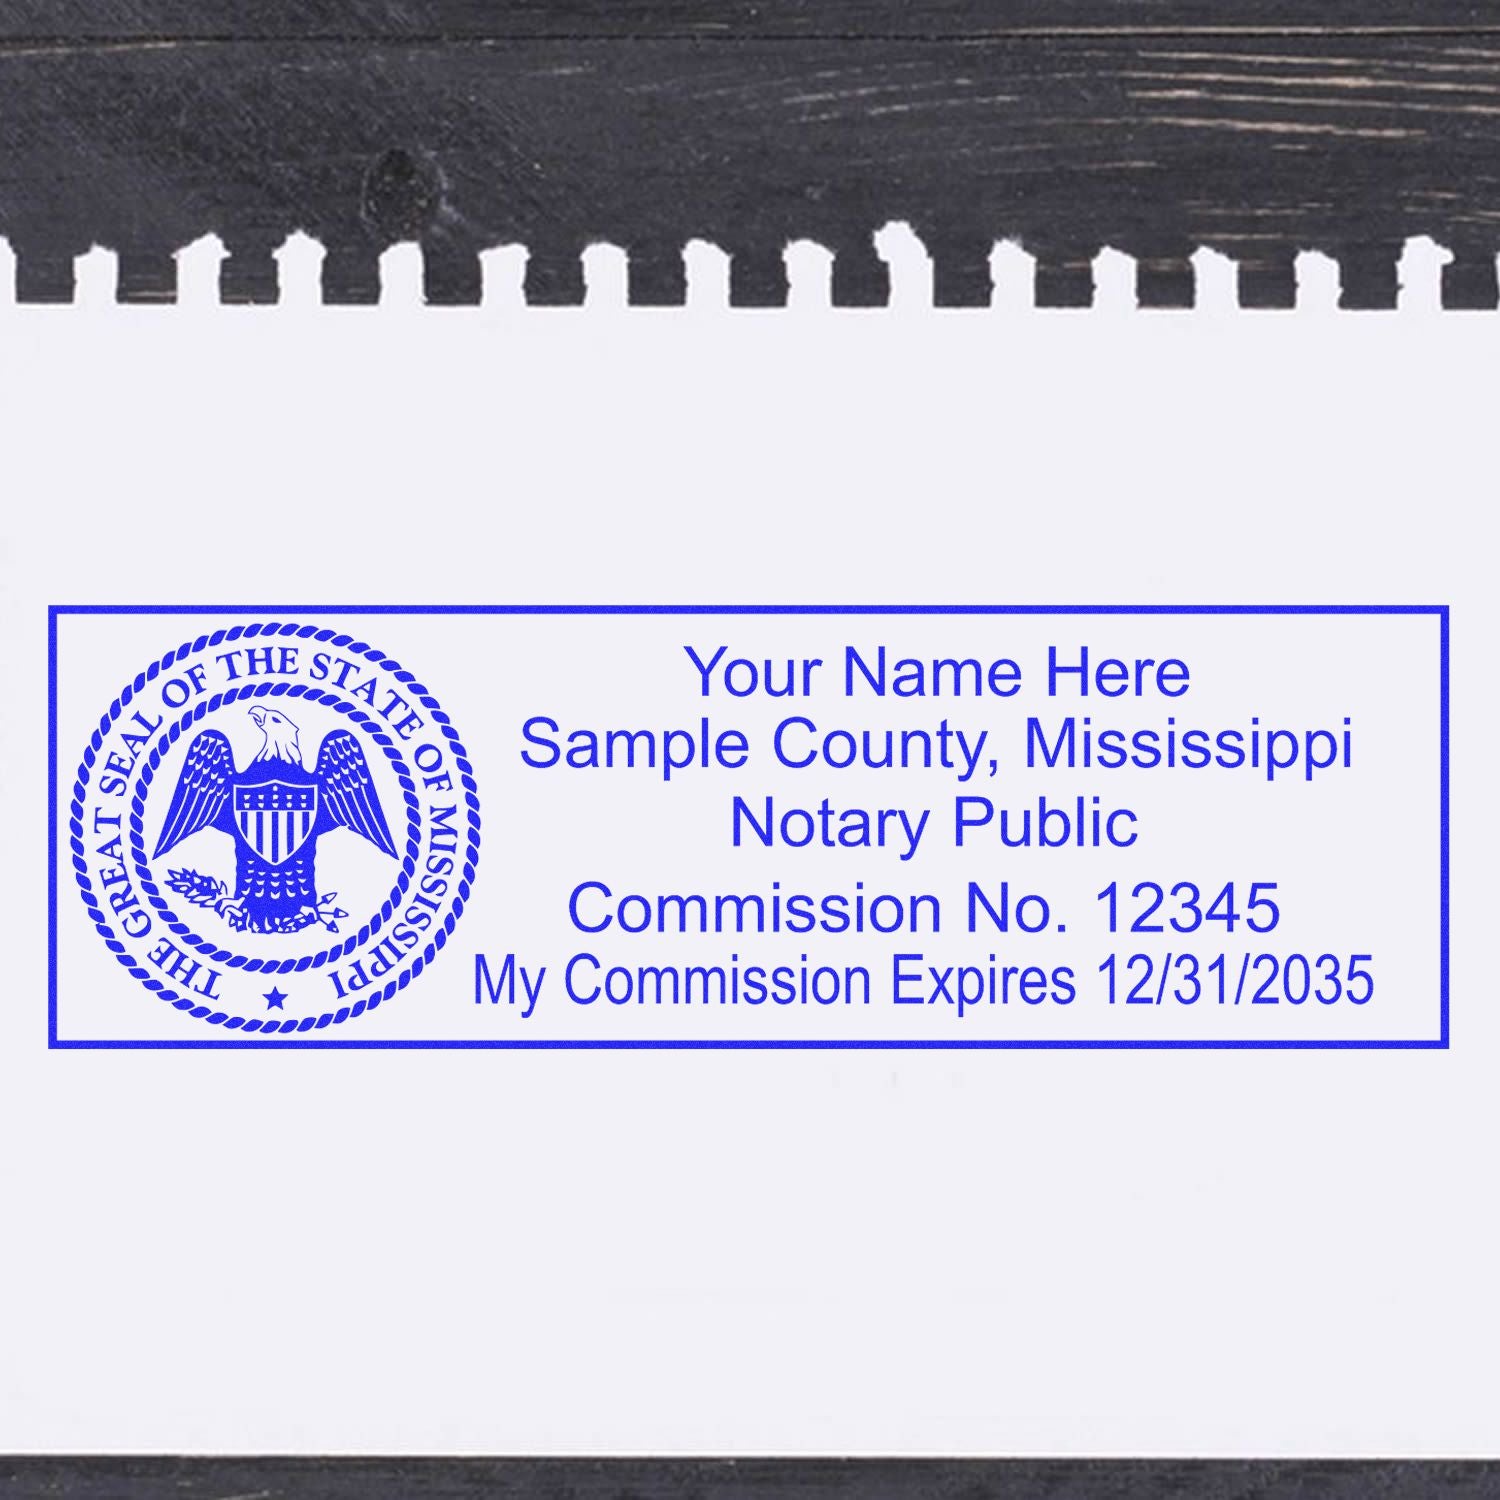 The main image for the Slim Pre-Inked State Seal Notary Stamp for Mississippi depicting a sample of the imprint and electronic files